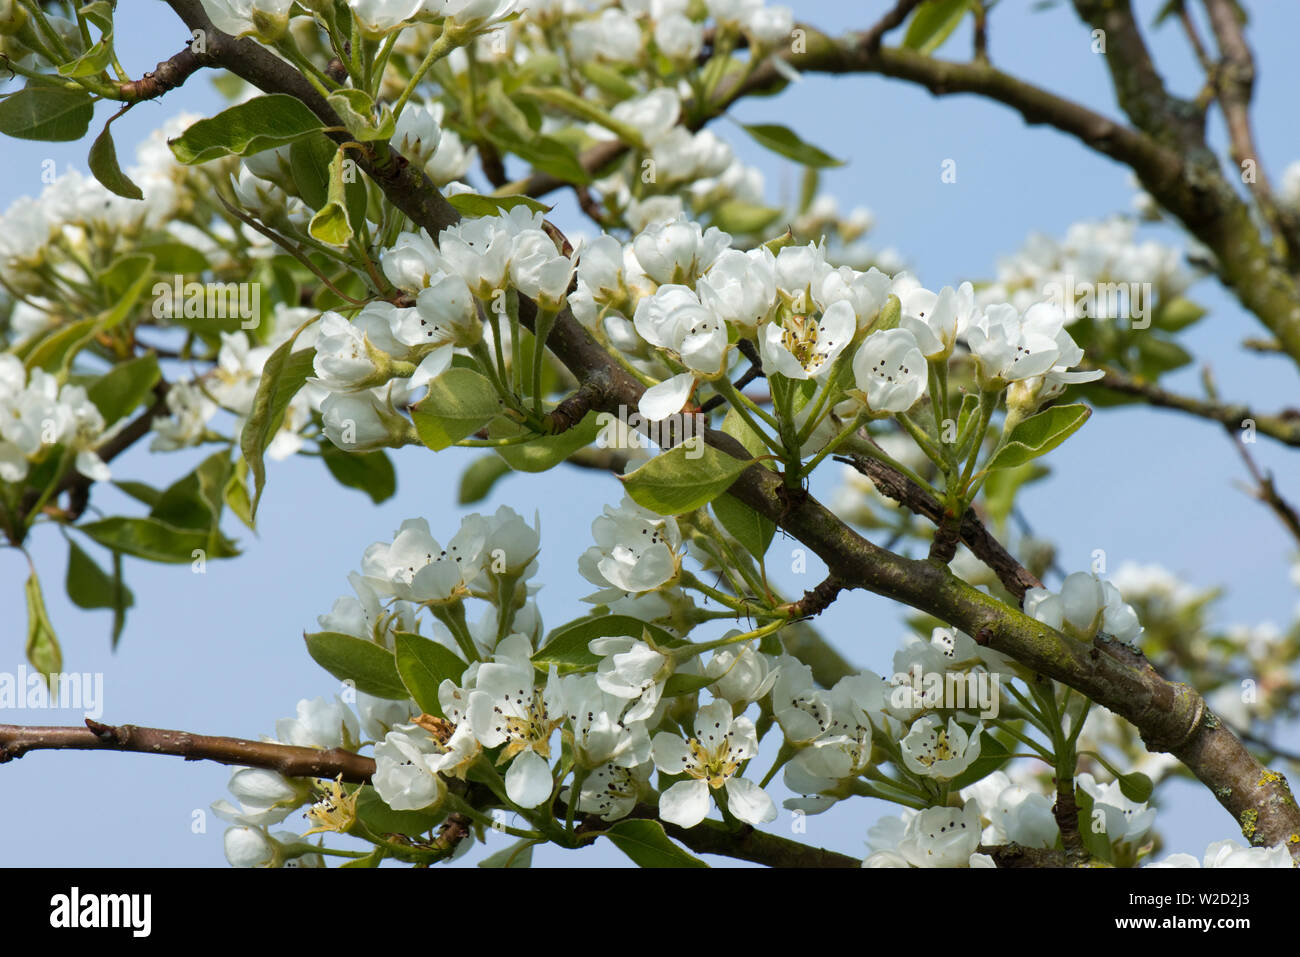 Blossom on an orchard pear tree against blue sky in spring, the green leaves are just developing, Berkshire, April Stock Photo